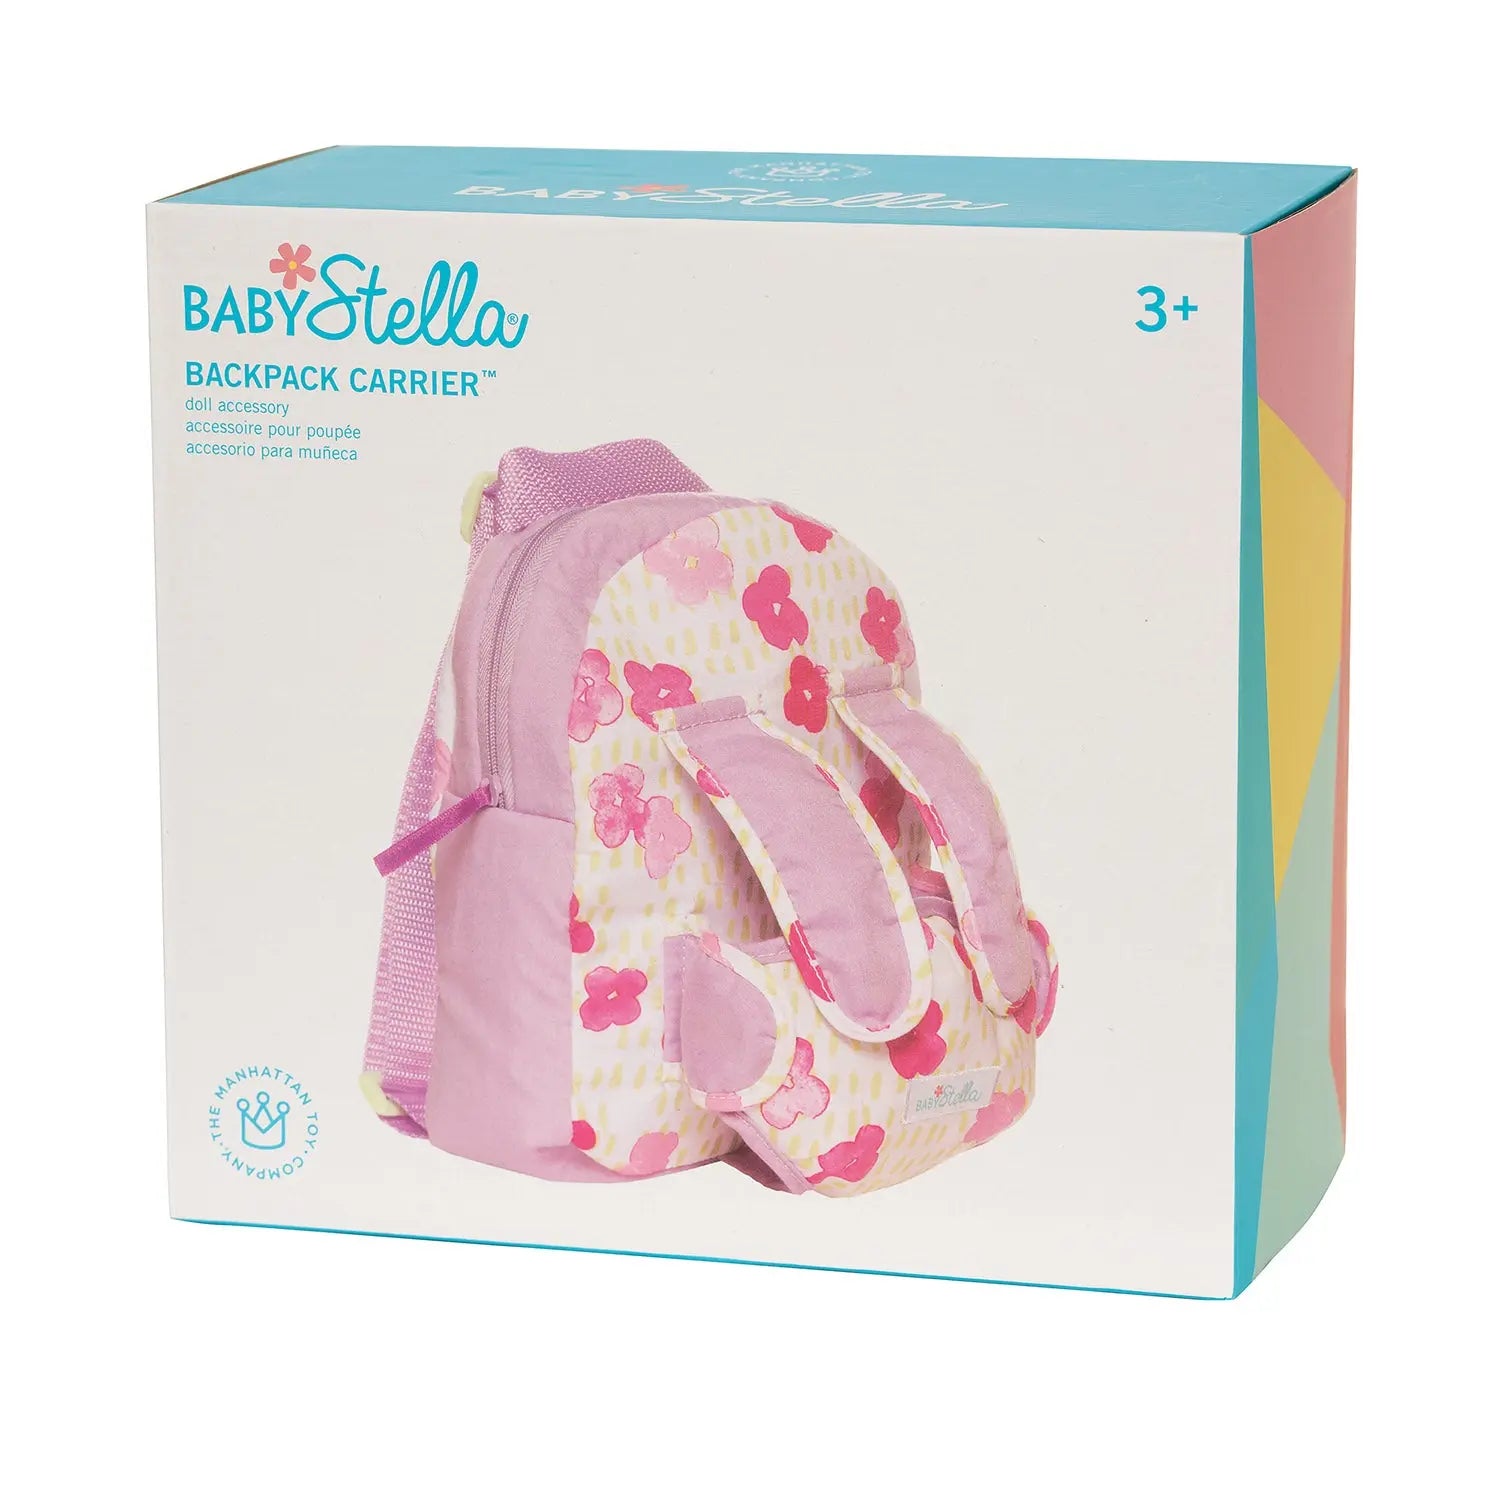 Manhattan Toy Baby Stella Baby Carrier and Backpack Accessory for